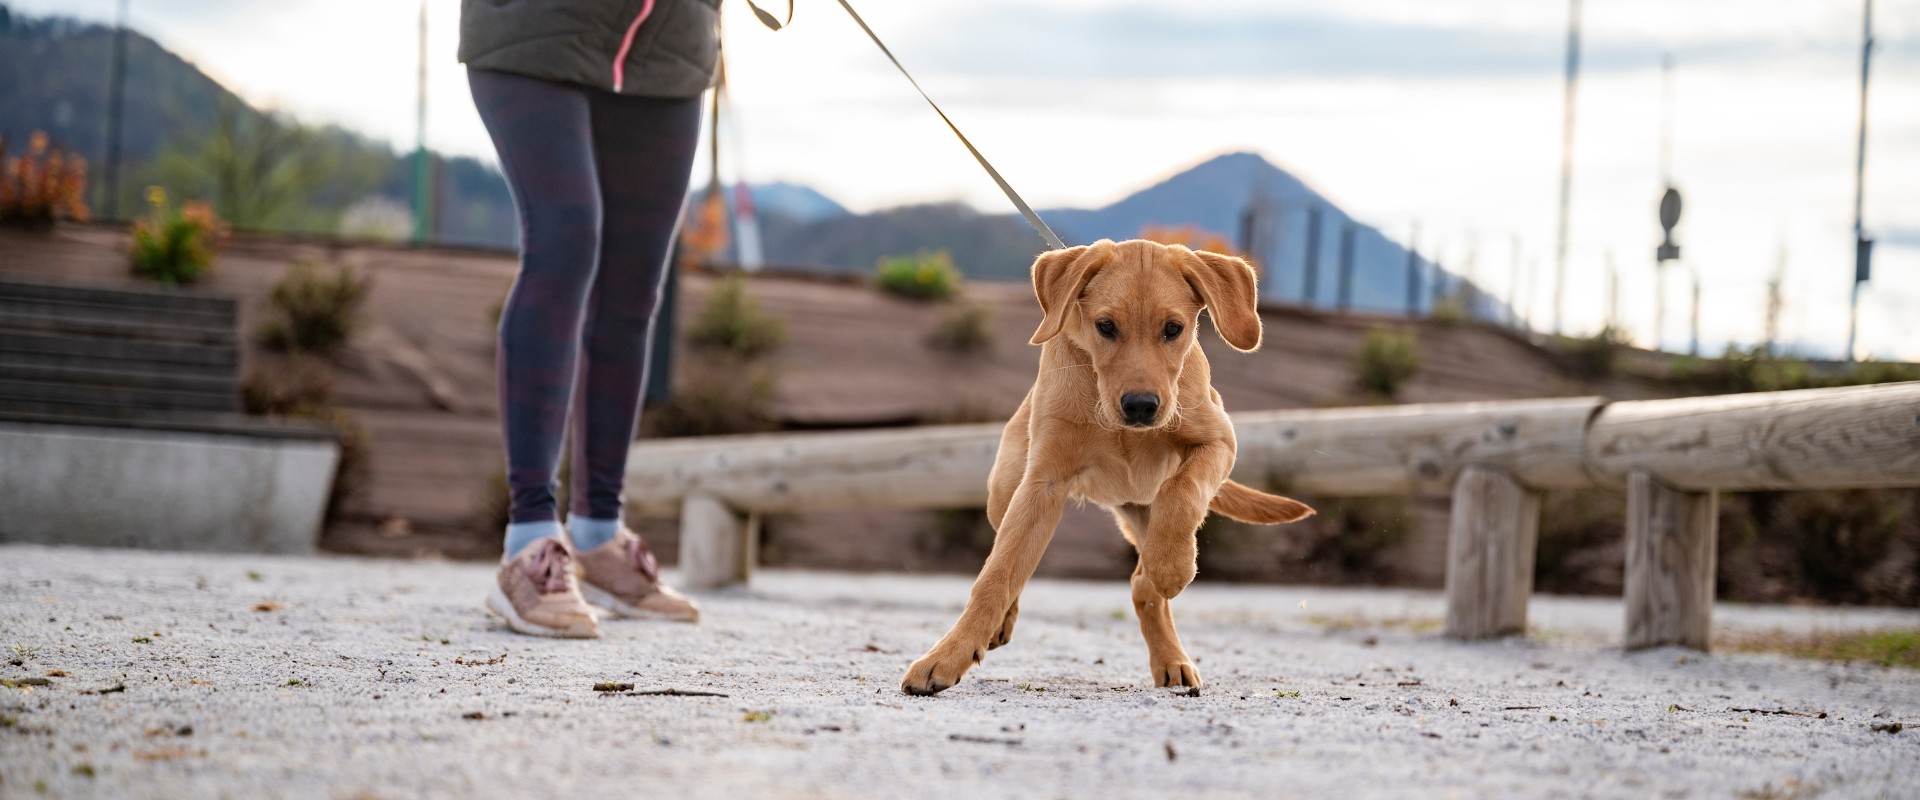 how to train your dog to walk on a leash without tugging